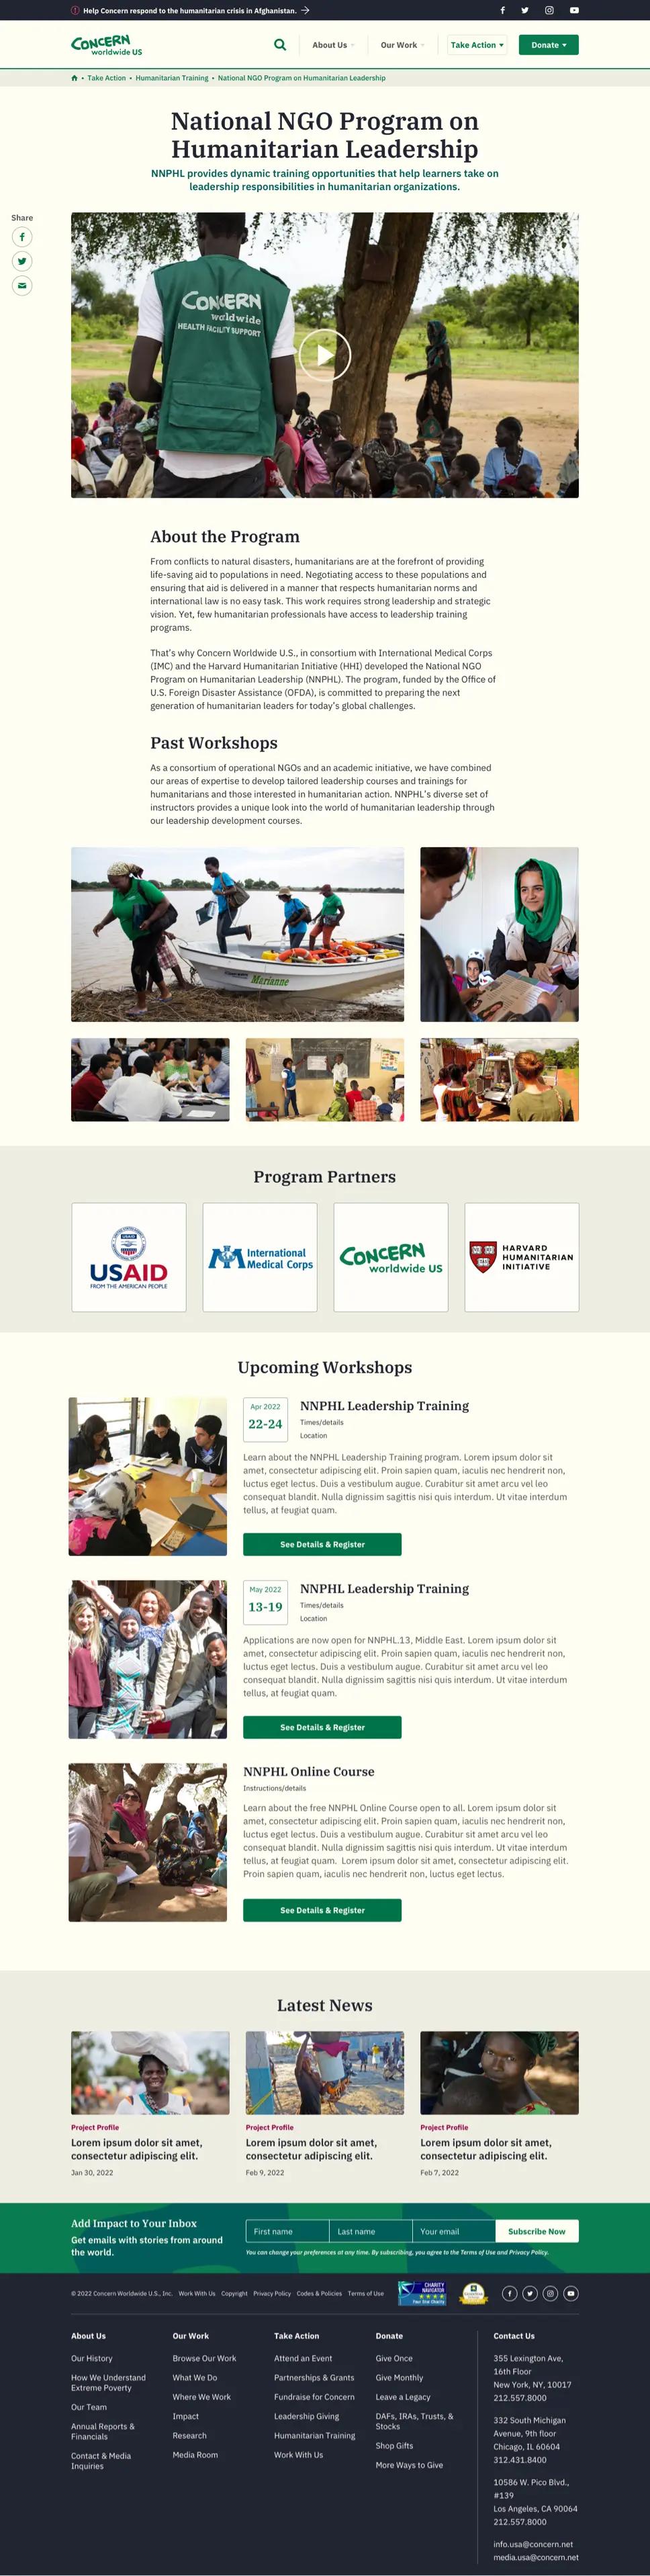 A screenshot of a humanitarian training page on Concern's website.